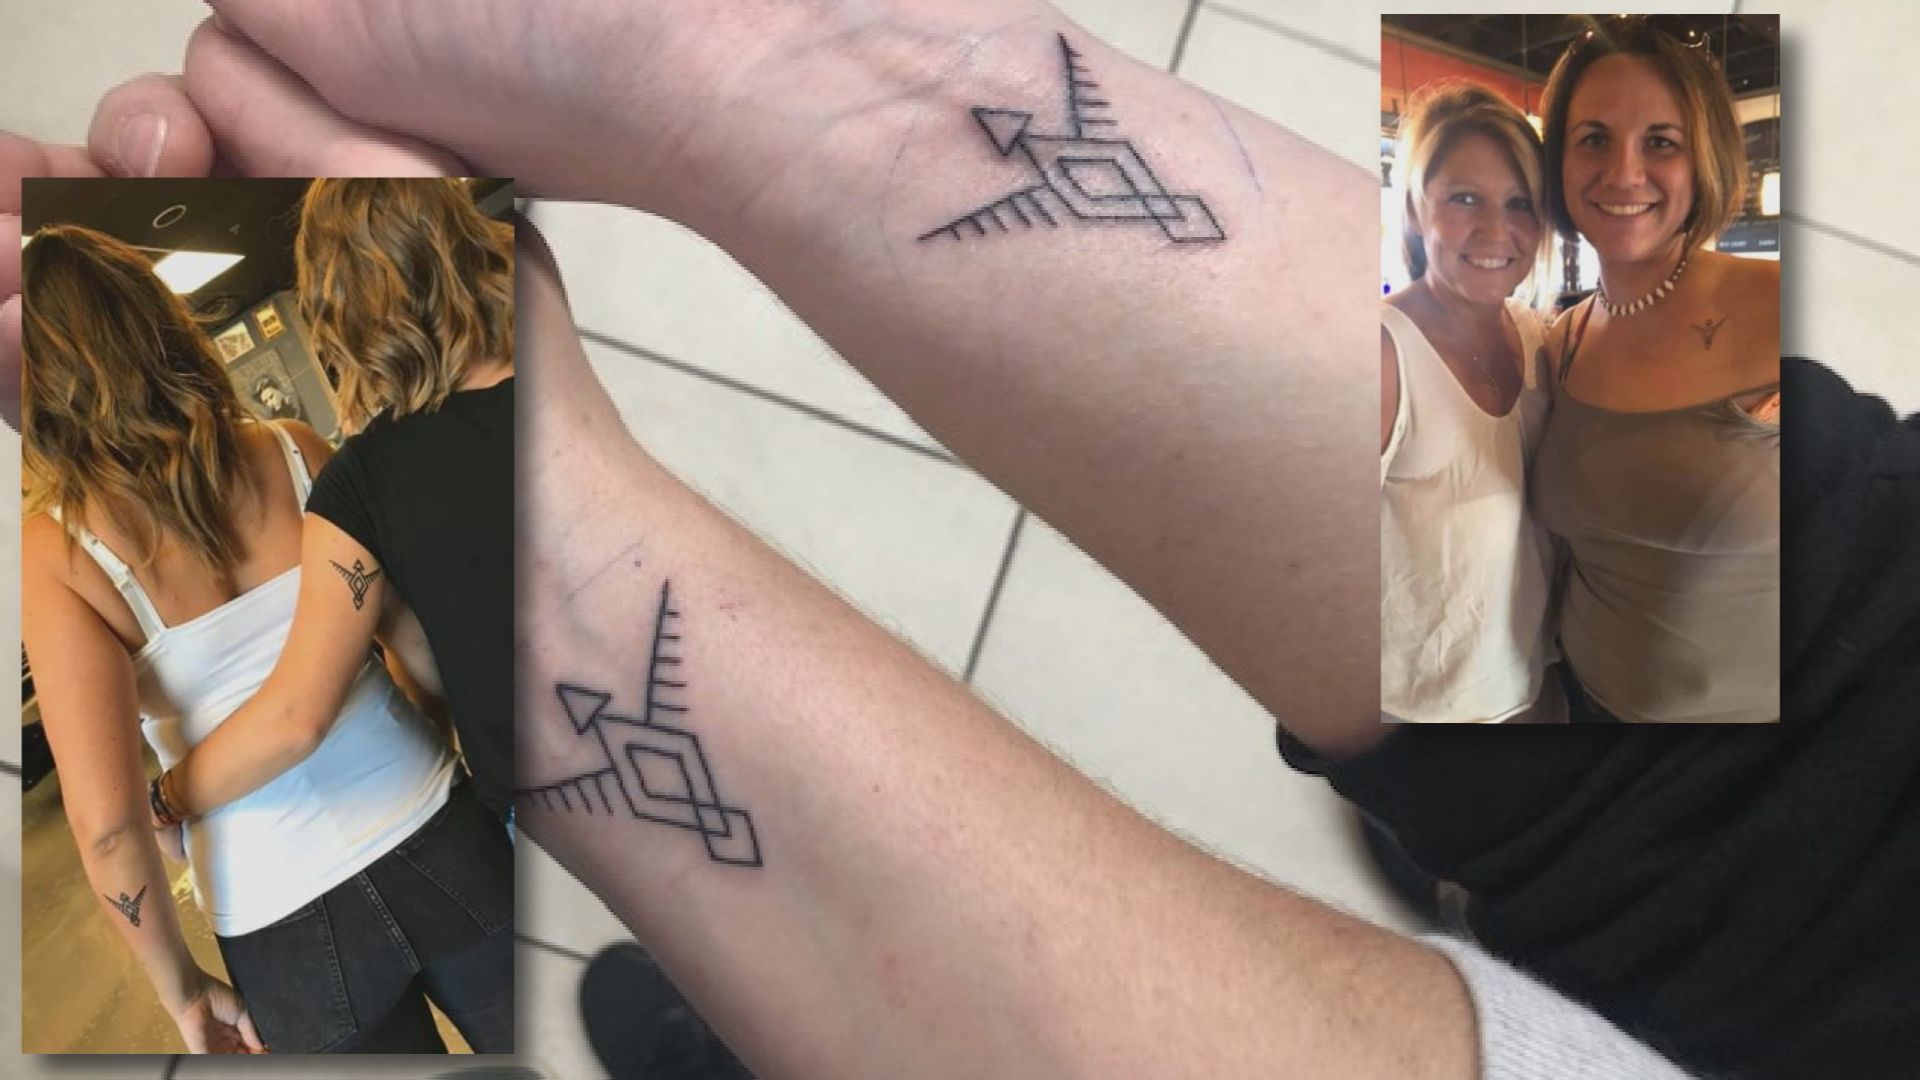 Musician Who Receives Suicide Survivor Notes From Fans Tattoos Their Names  on His Arm